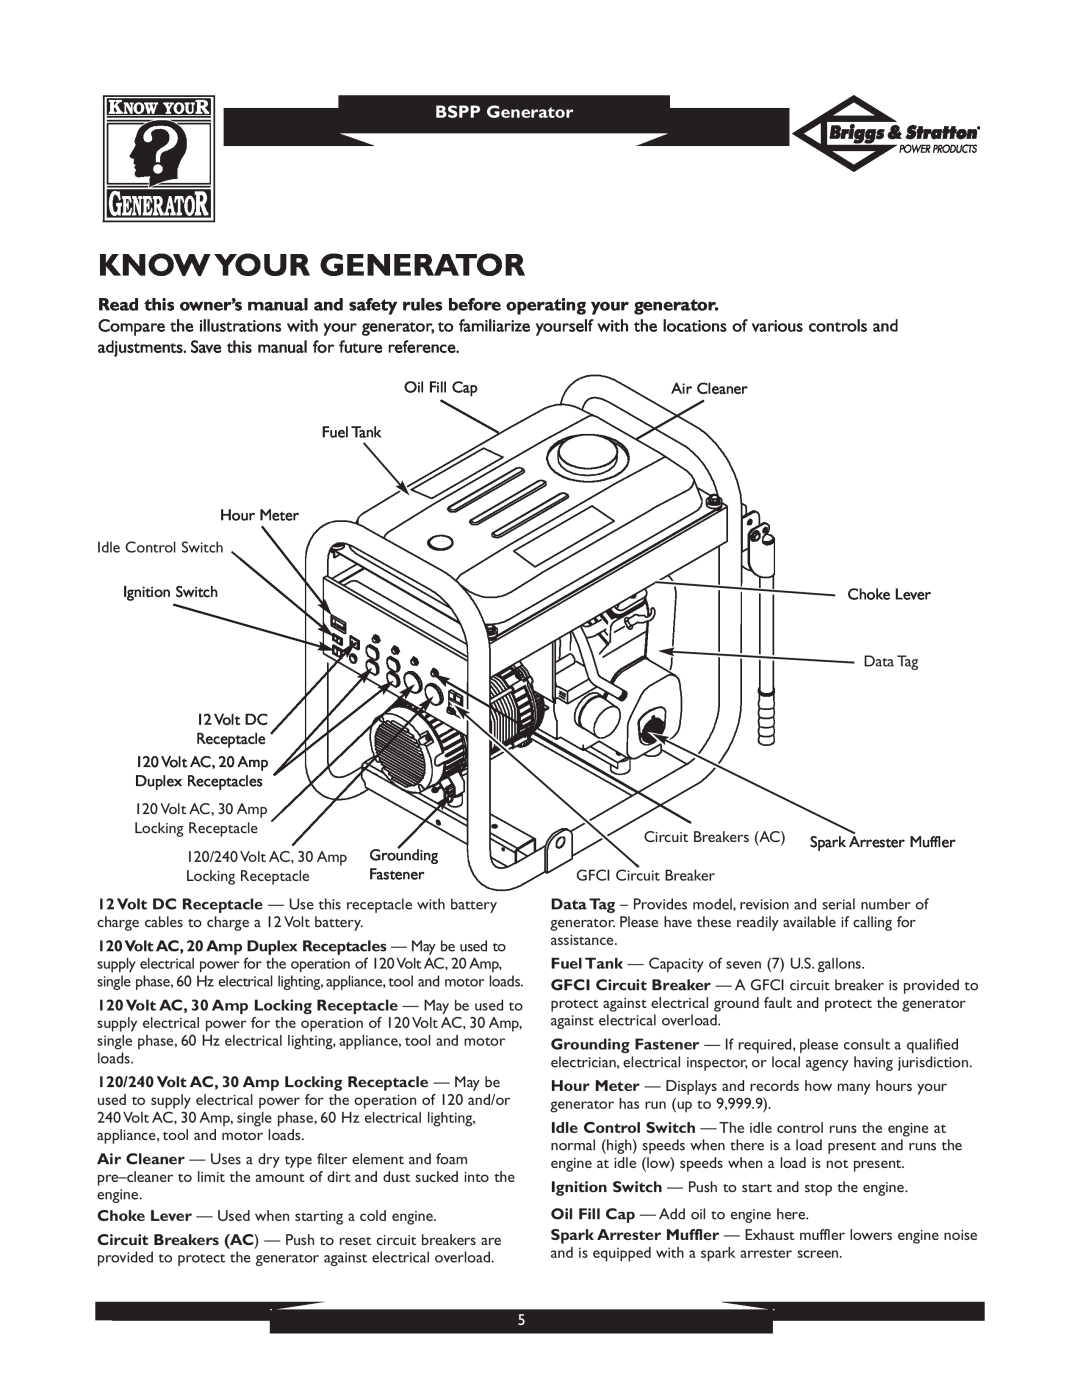 Briggs & Stratton PRO8000 owner manual Know Your Generator, BSPP Generator 